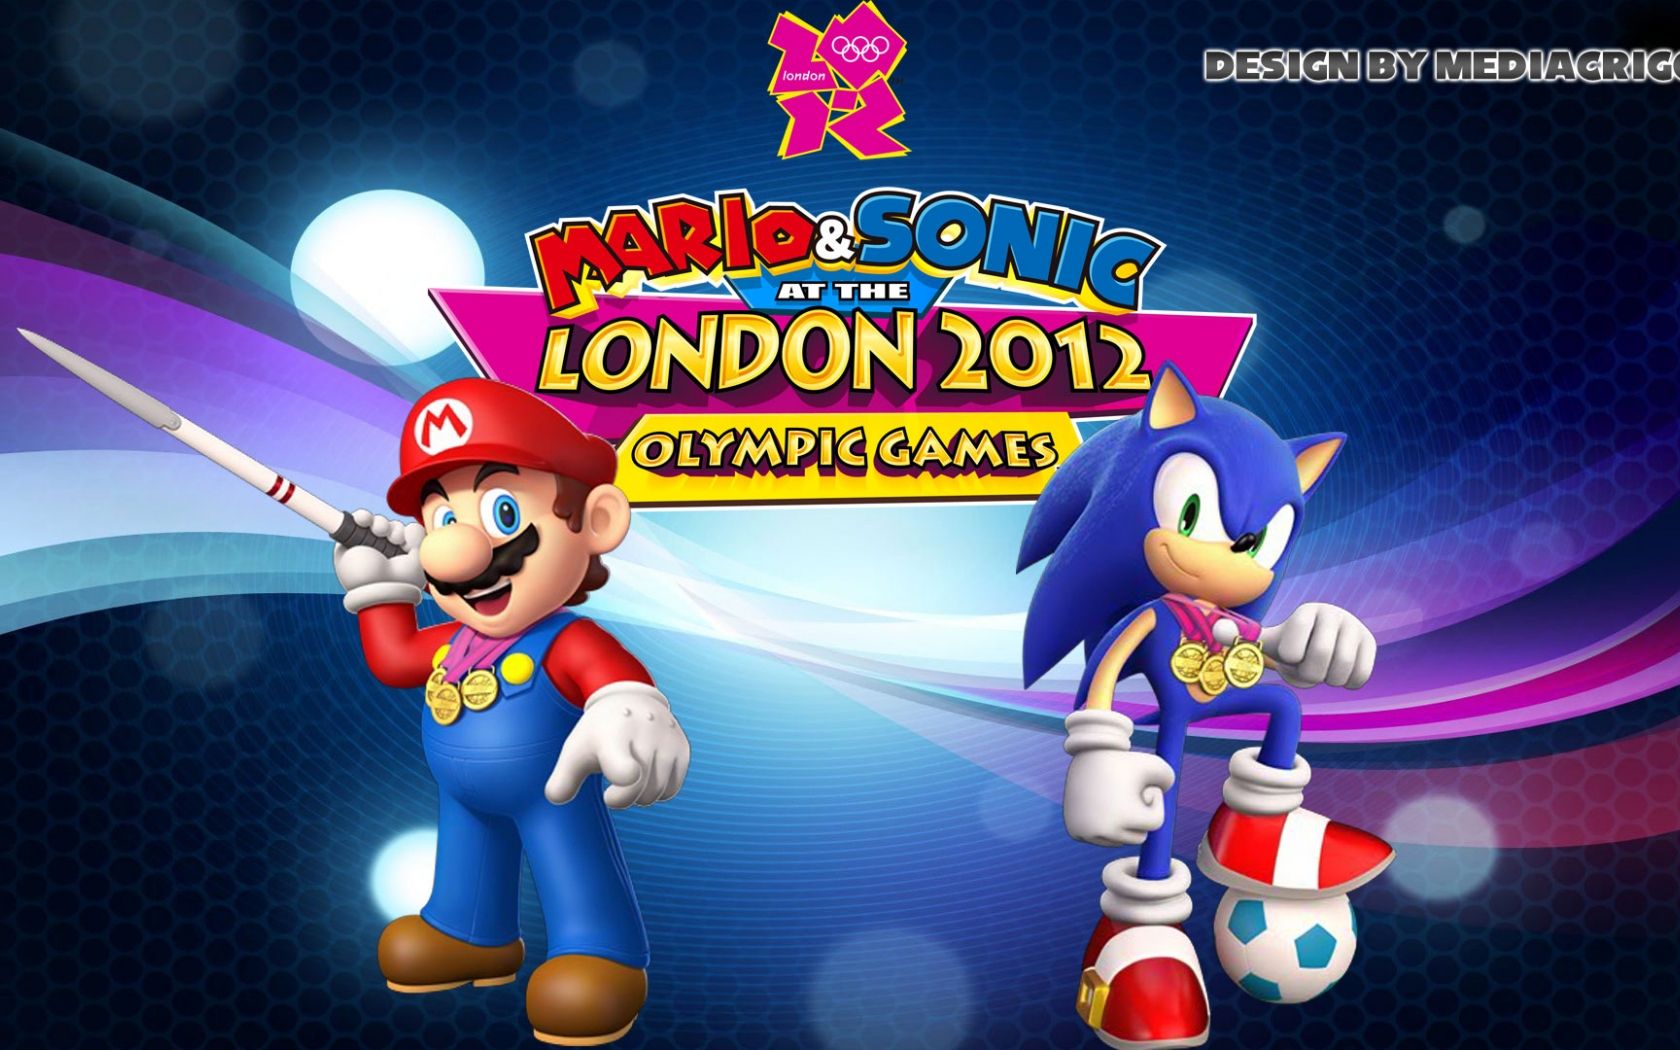 Free download Games Wallpaper Mario and Sonic at the London 2012